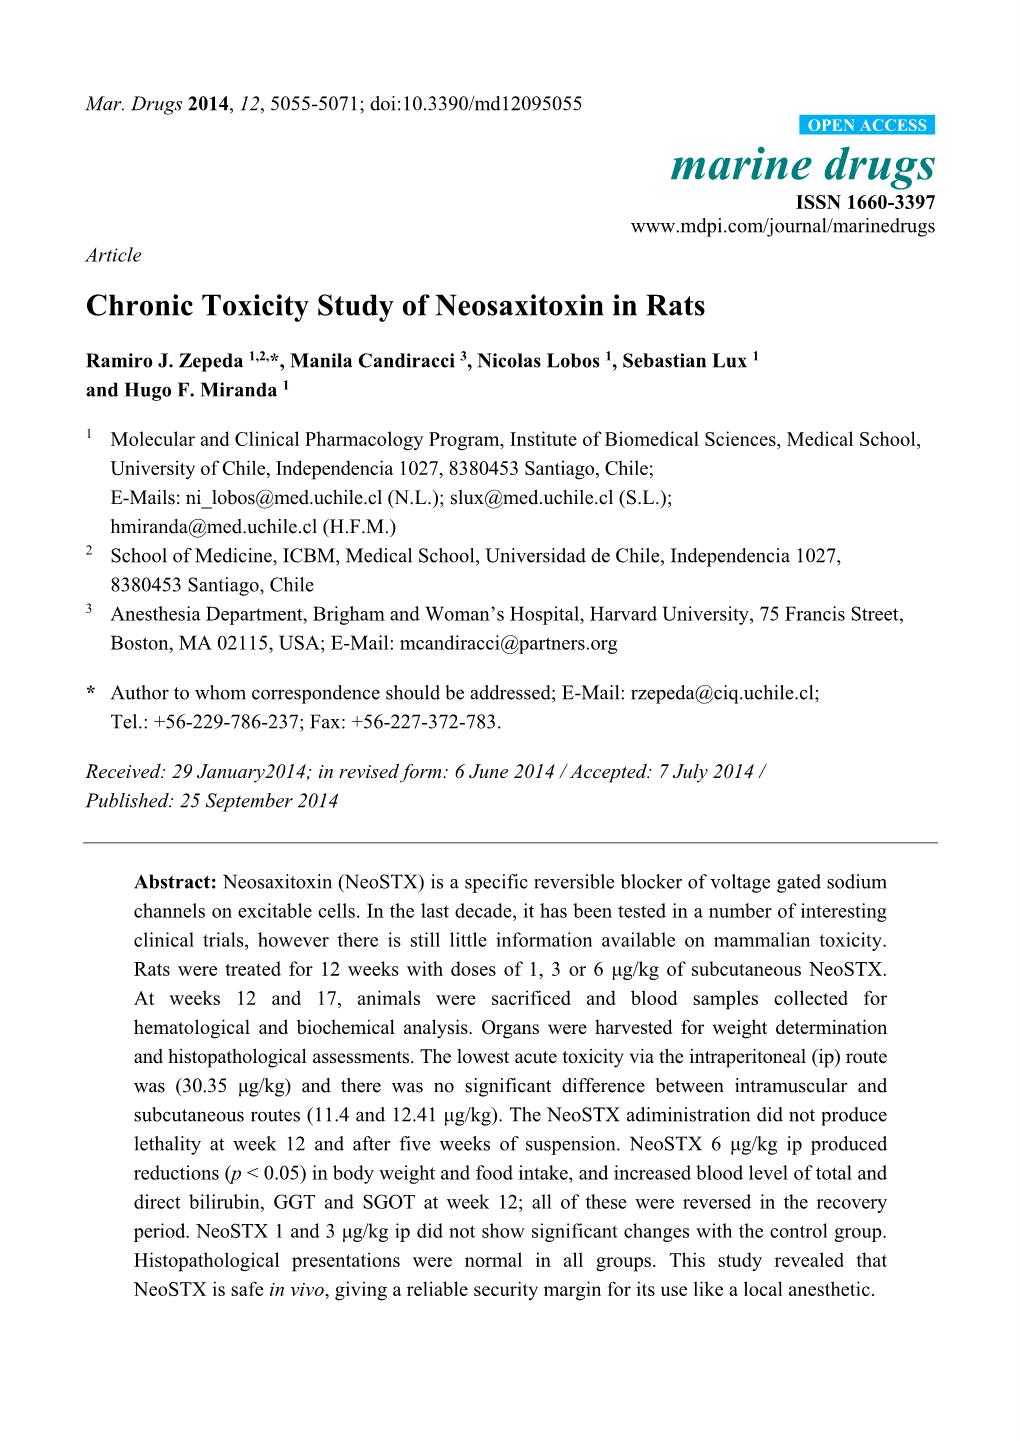 Chronic Toxicity Study of Neosaxitoxin in Rats